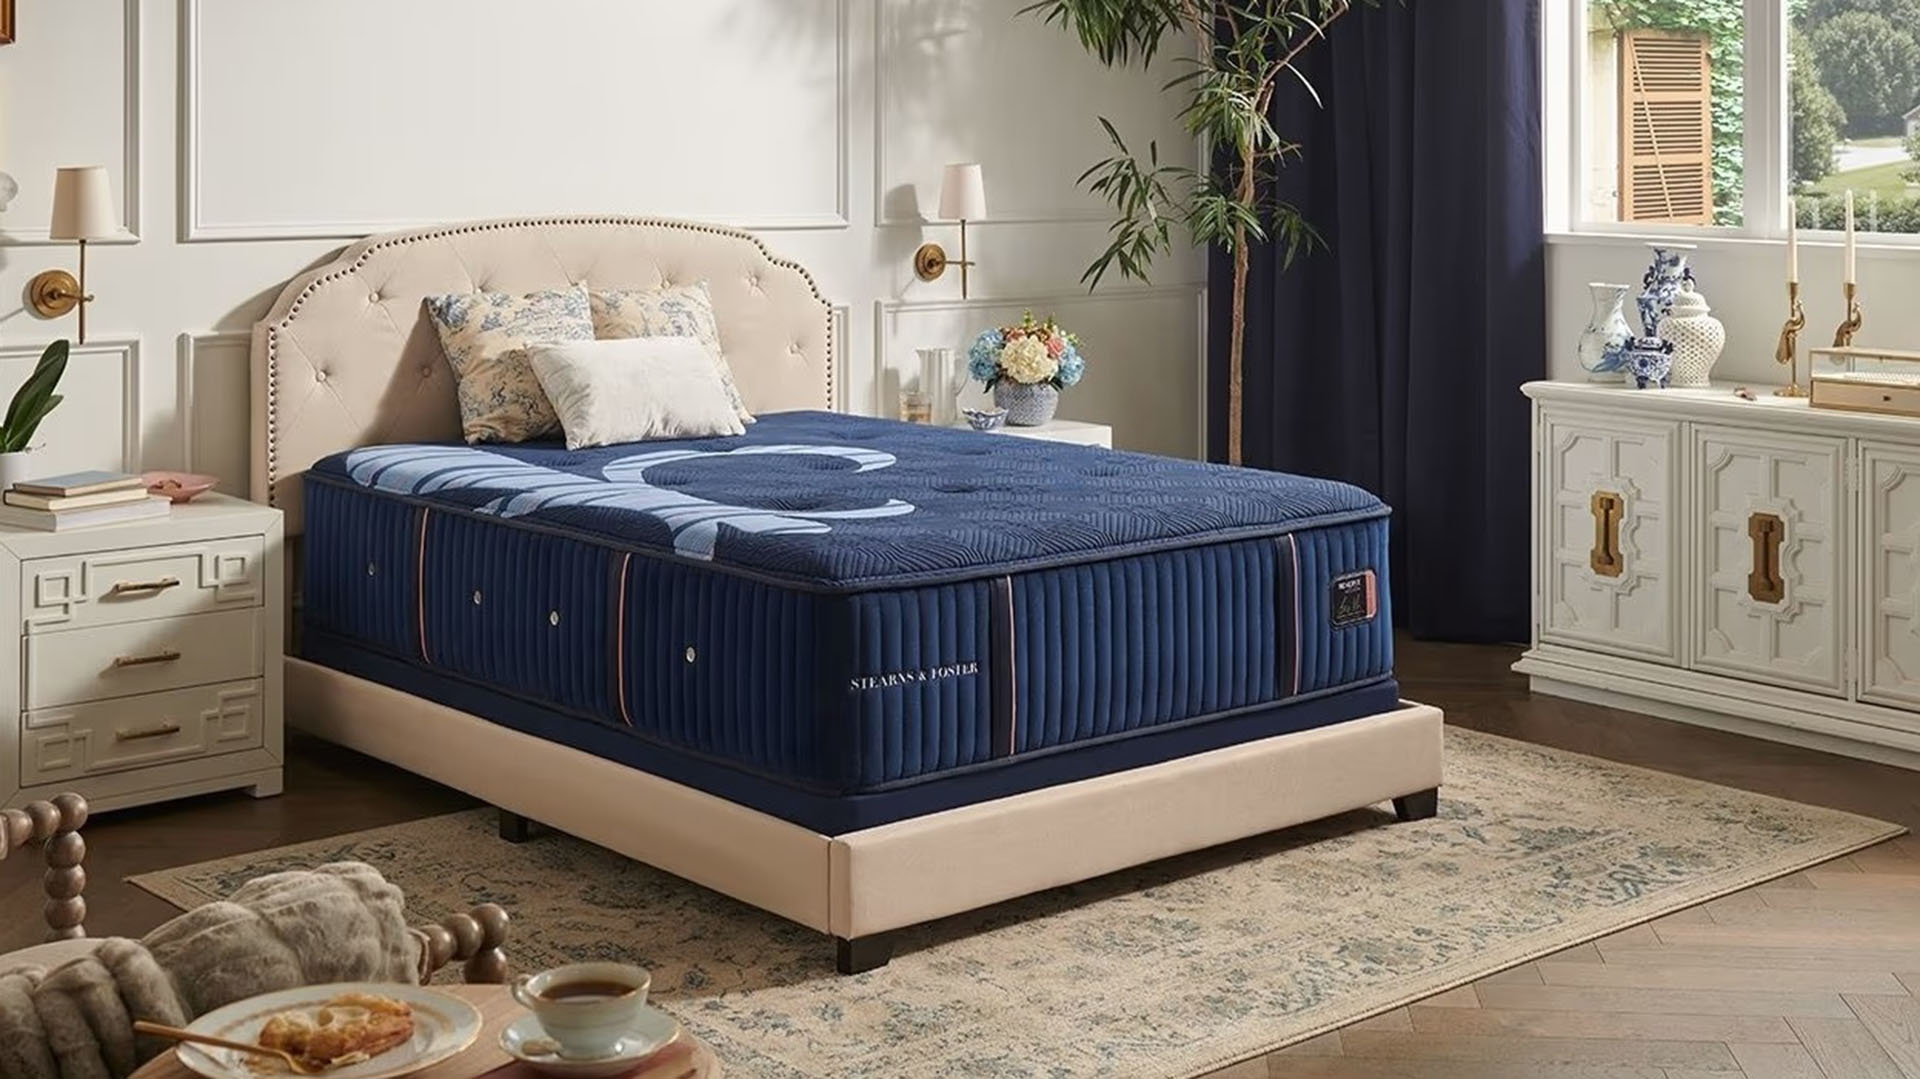 Stearns & Foster mattresses in DeKalb are designed with comfort and support in mind.